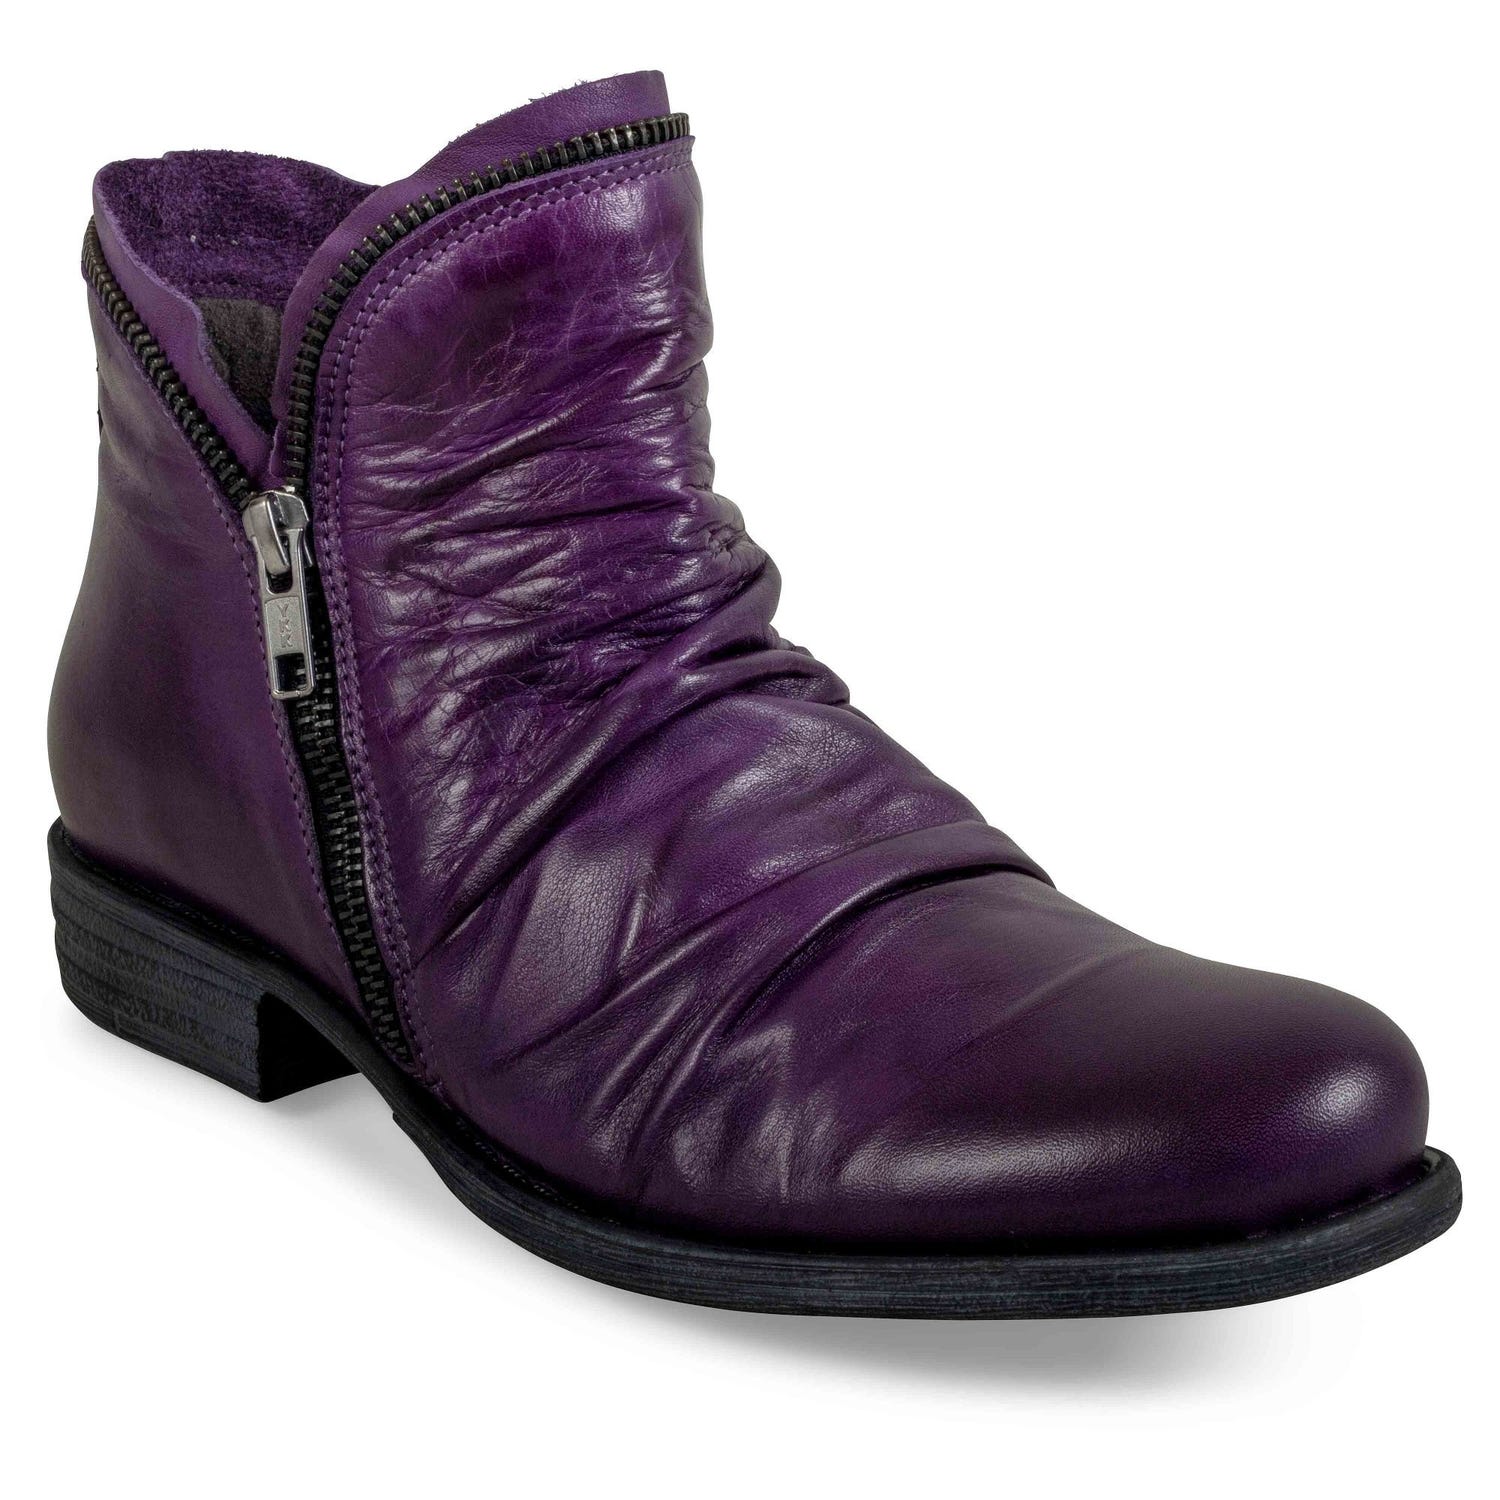 Outer front view of the miz mooz luna bootie in a deep dark purple color. This flat bootie has a zipper on the side and decorative zipper trim around the front and back opening for the foot.